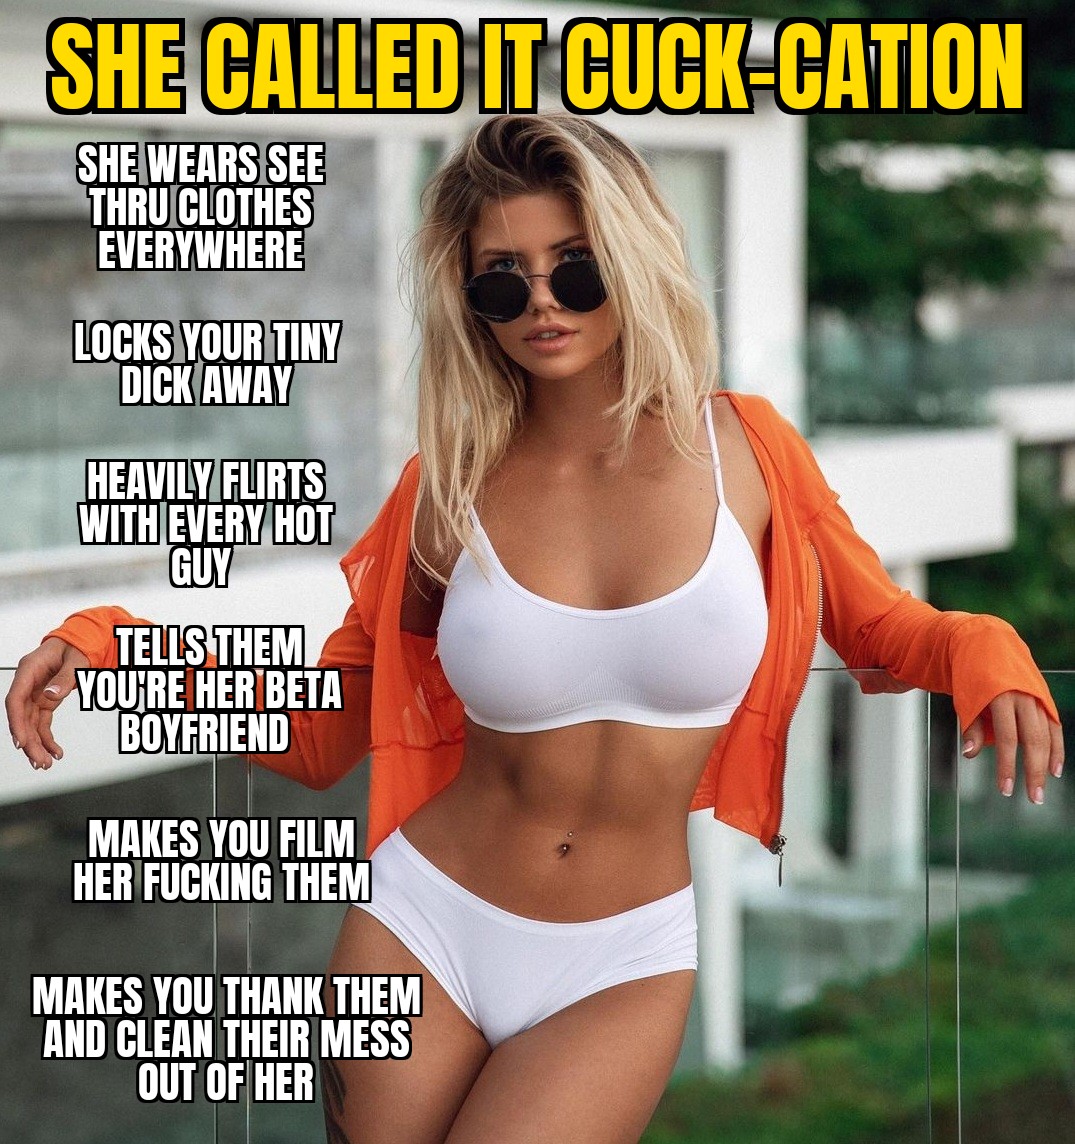 Hope youre ready for cuck-cation picture